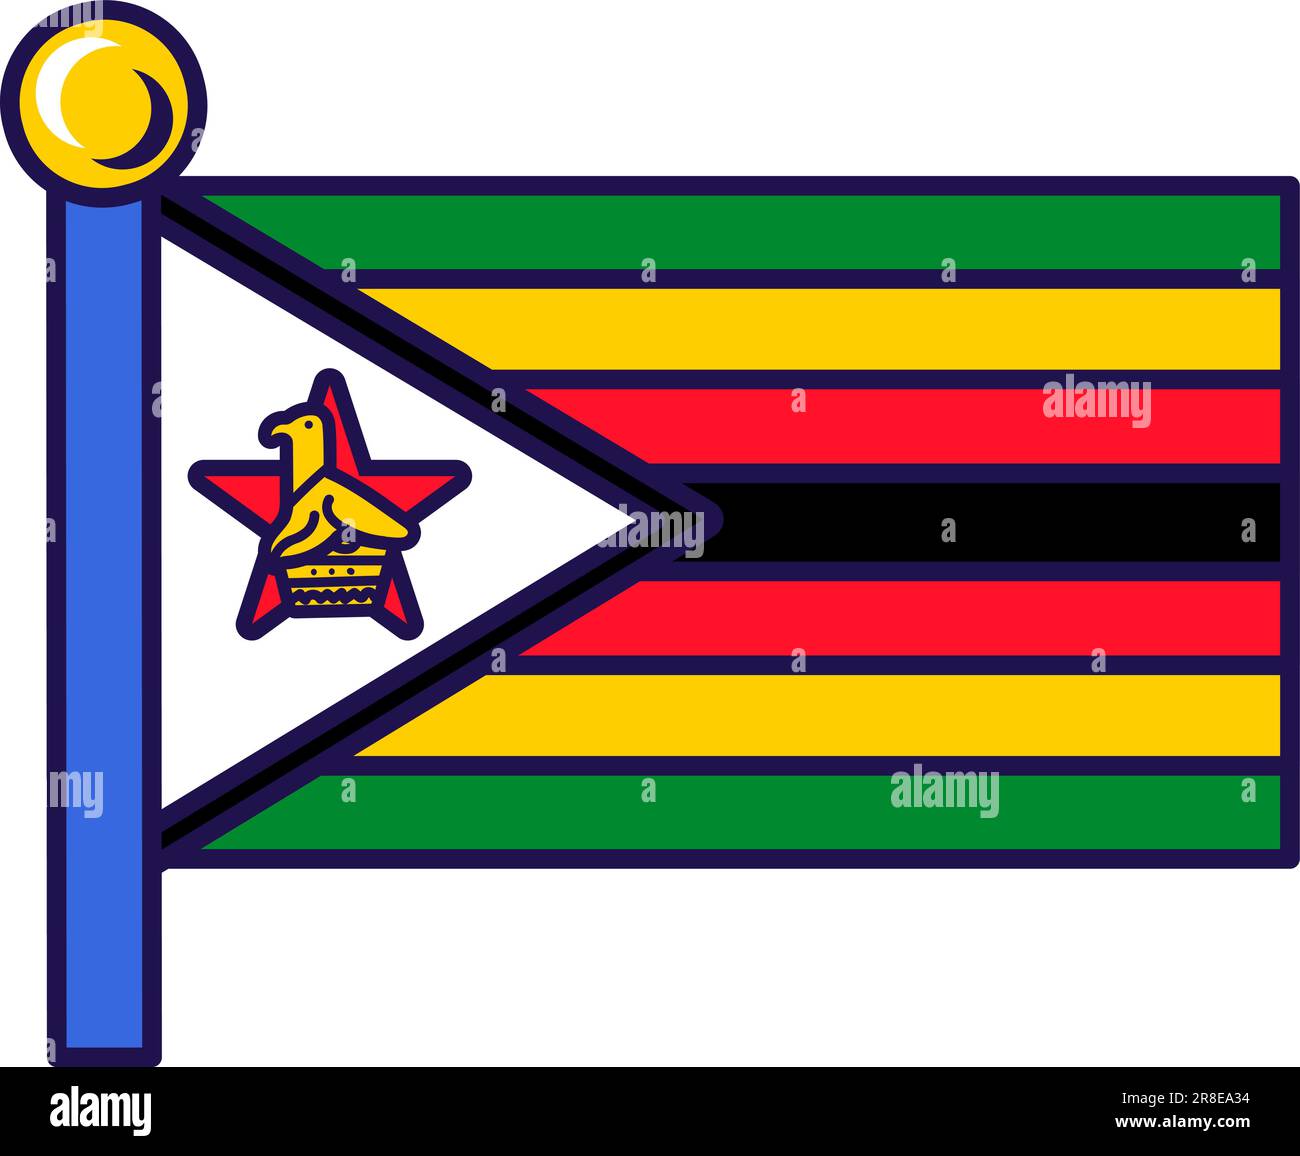 Zimbabwe republic nation flag on flagpole vector. Horizontal stripes of green, yellow, black and red, bird and star on white triangle field. African c Stock Vector